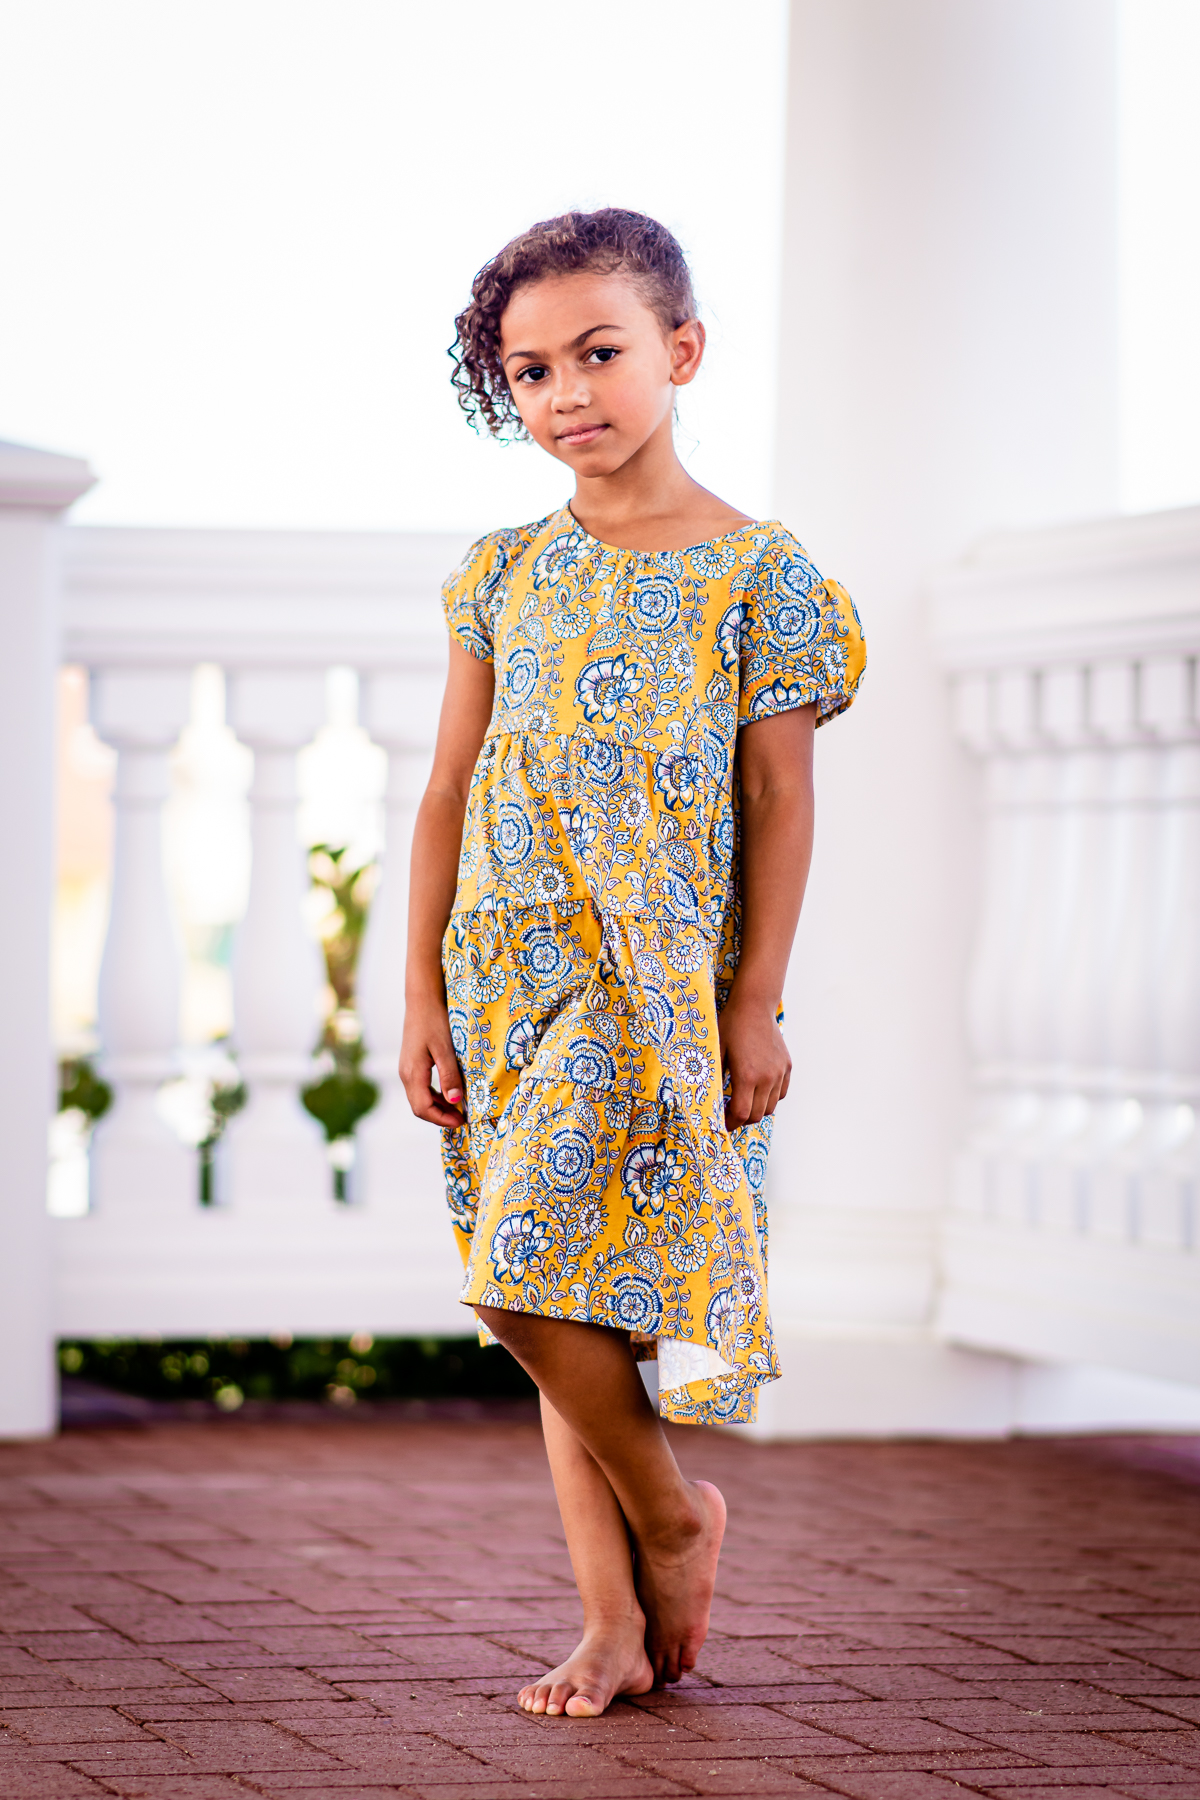 Homeschooling Or Not: 21 Back To School Outfits For All The Kids